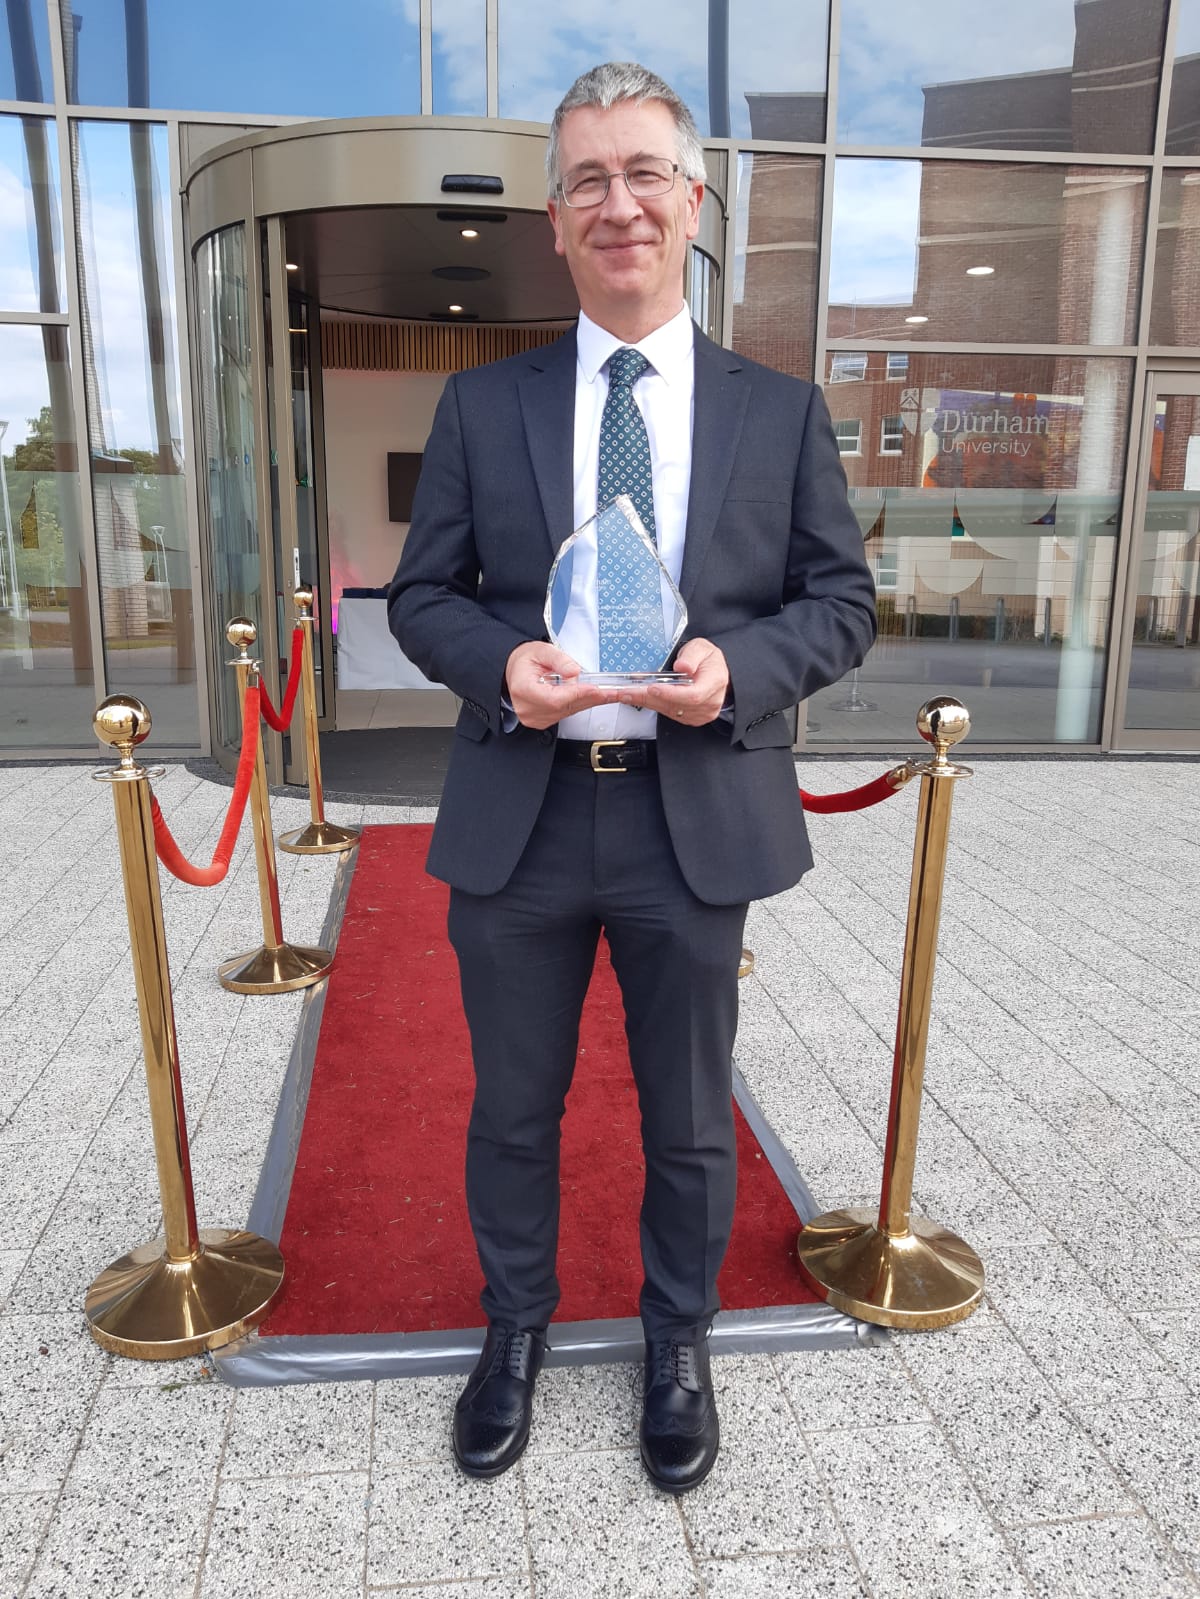 A man standing at the end of a red carpet holding his award